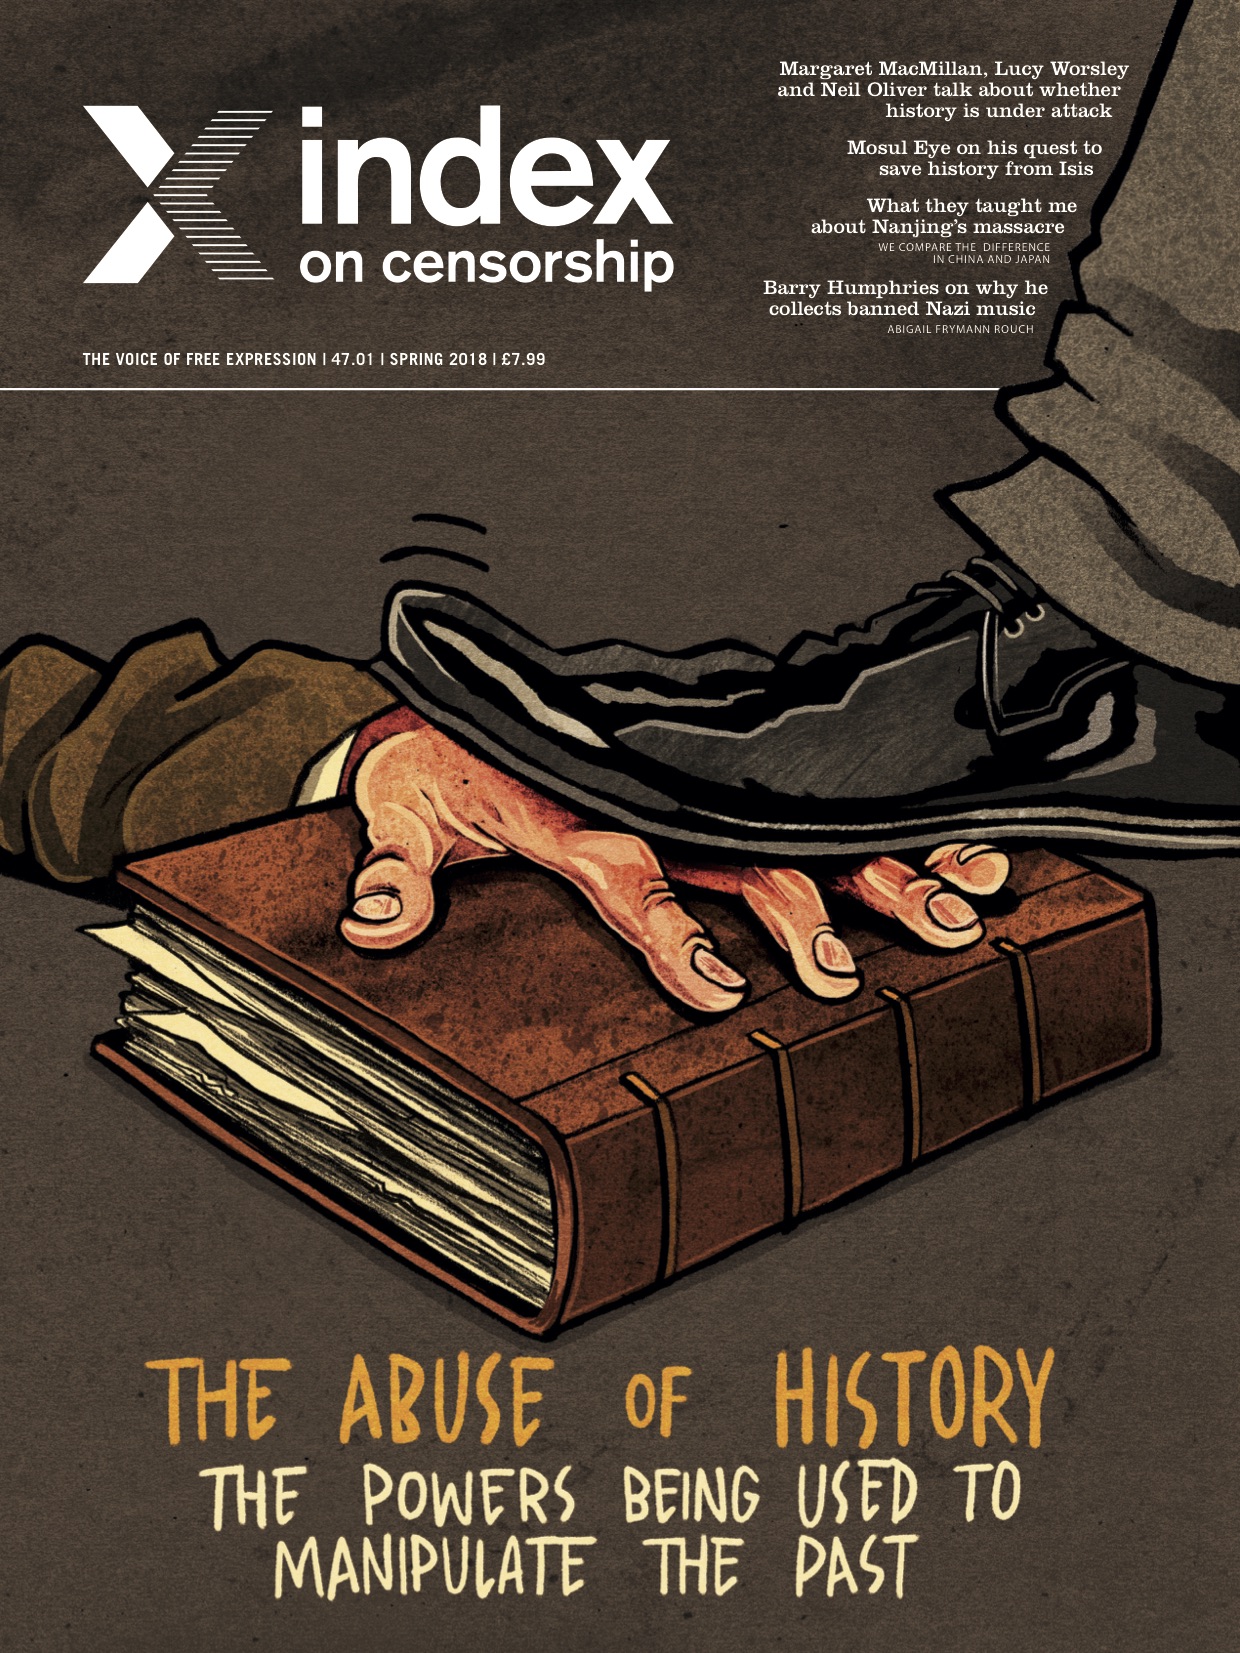 Contents: The abuse of history